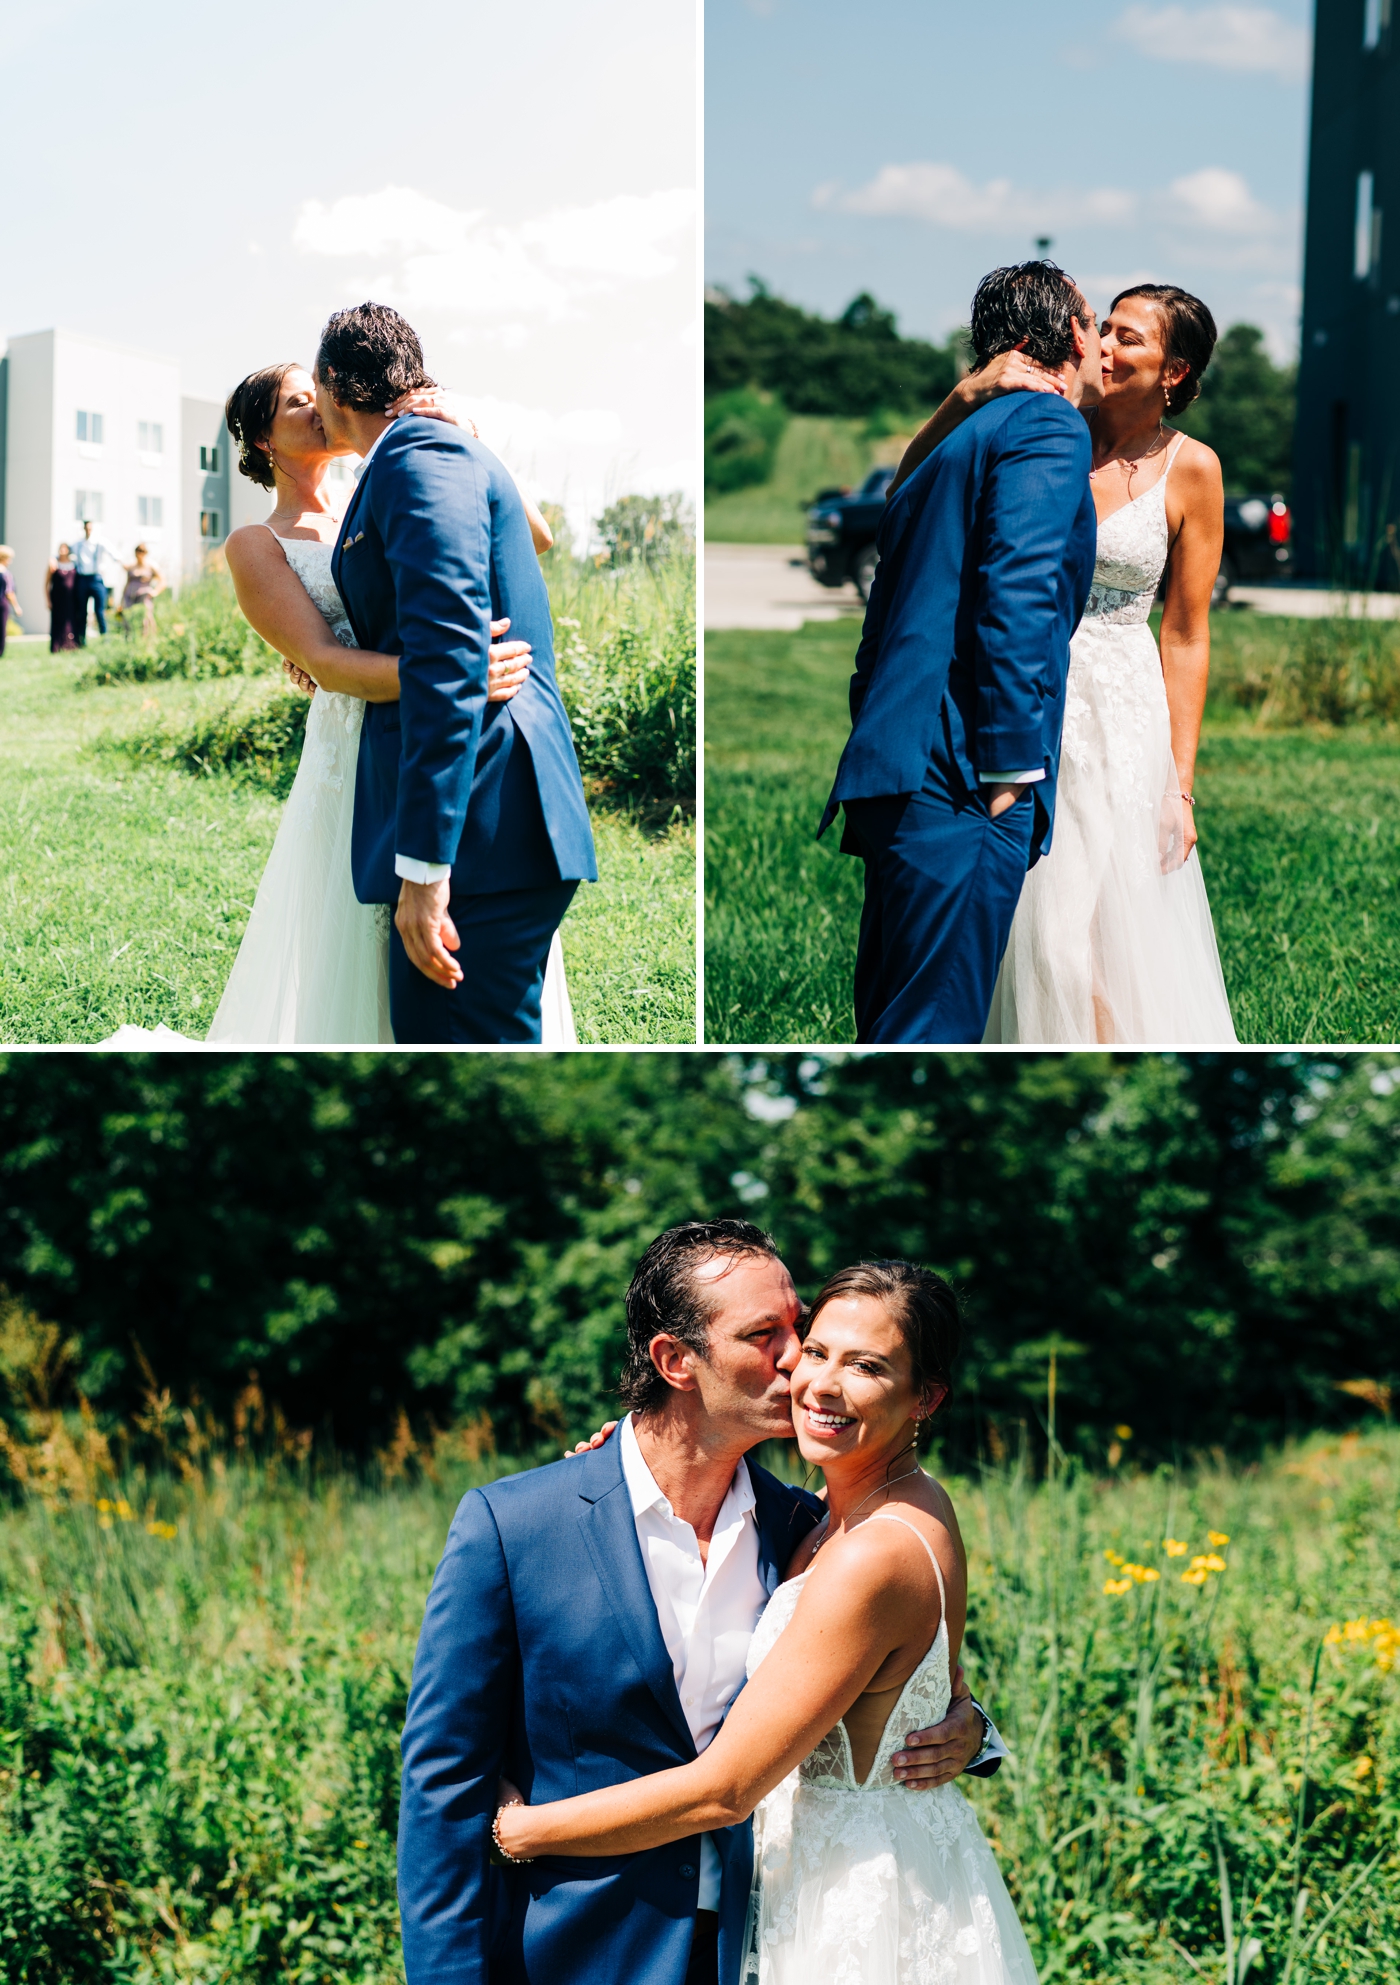 Summer wedding in Southern Illinois at The White Silo Barn